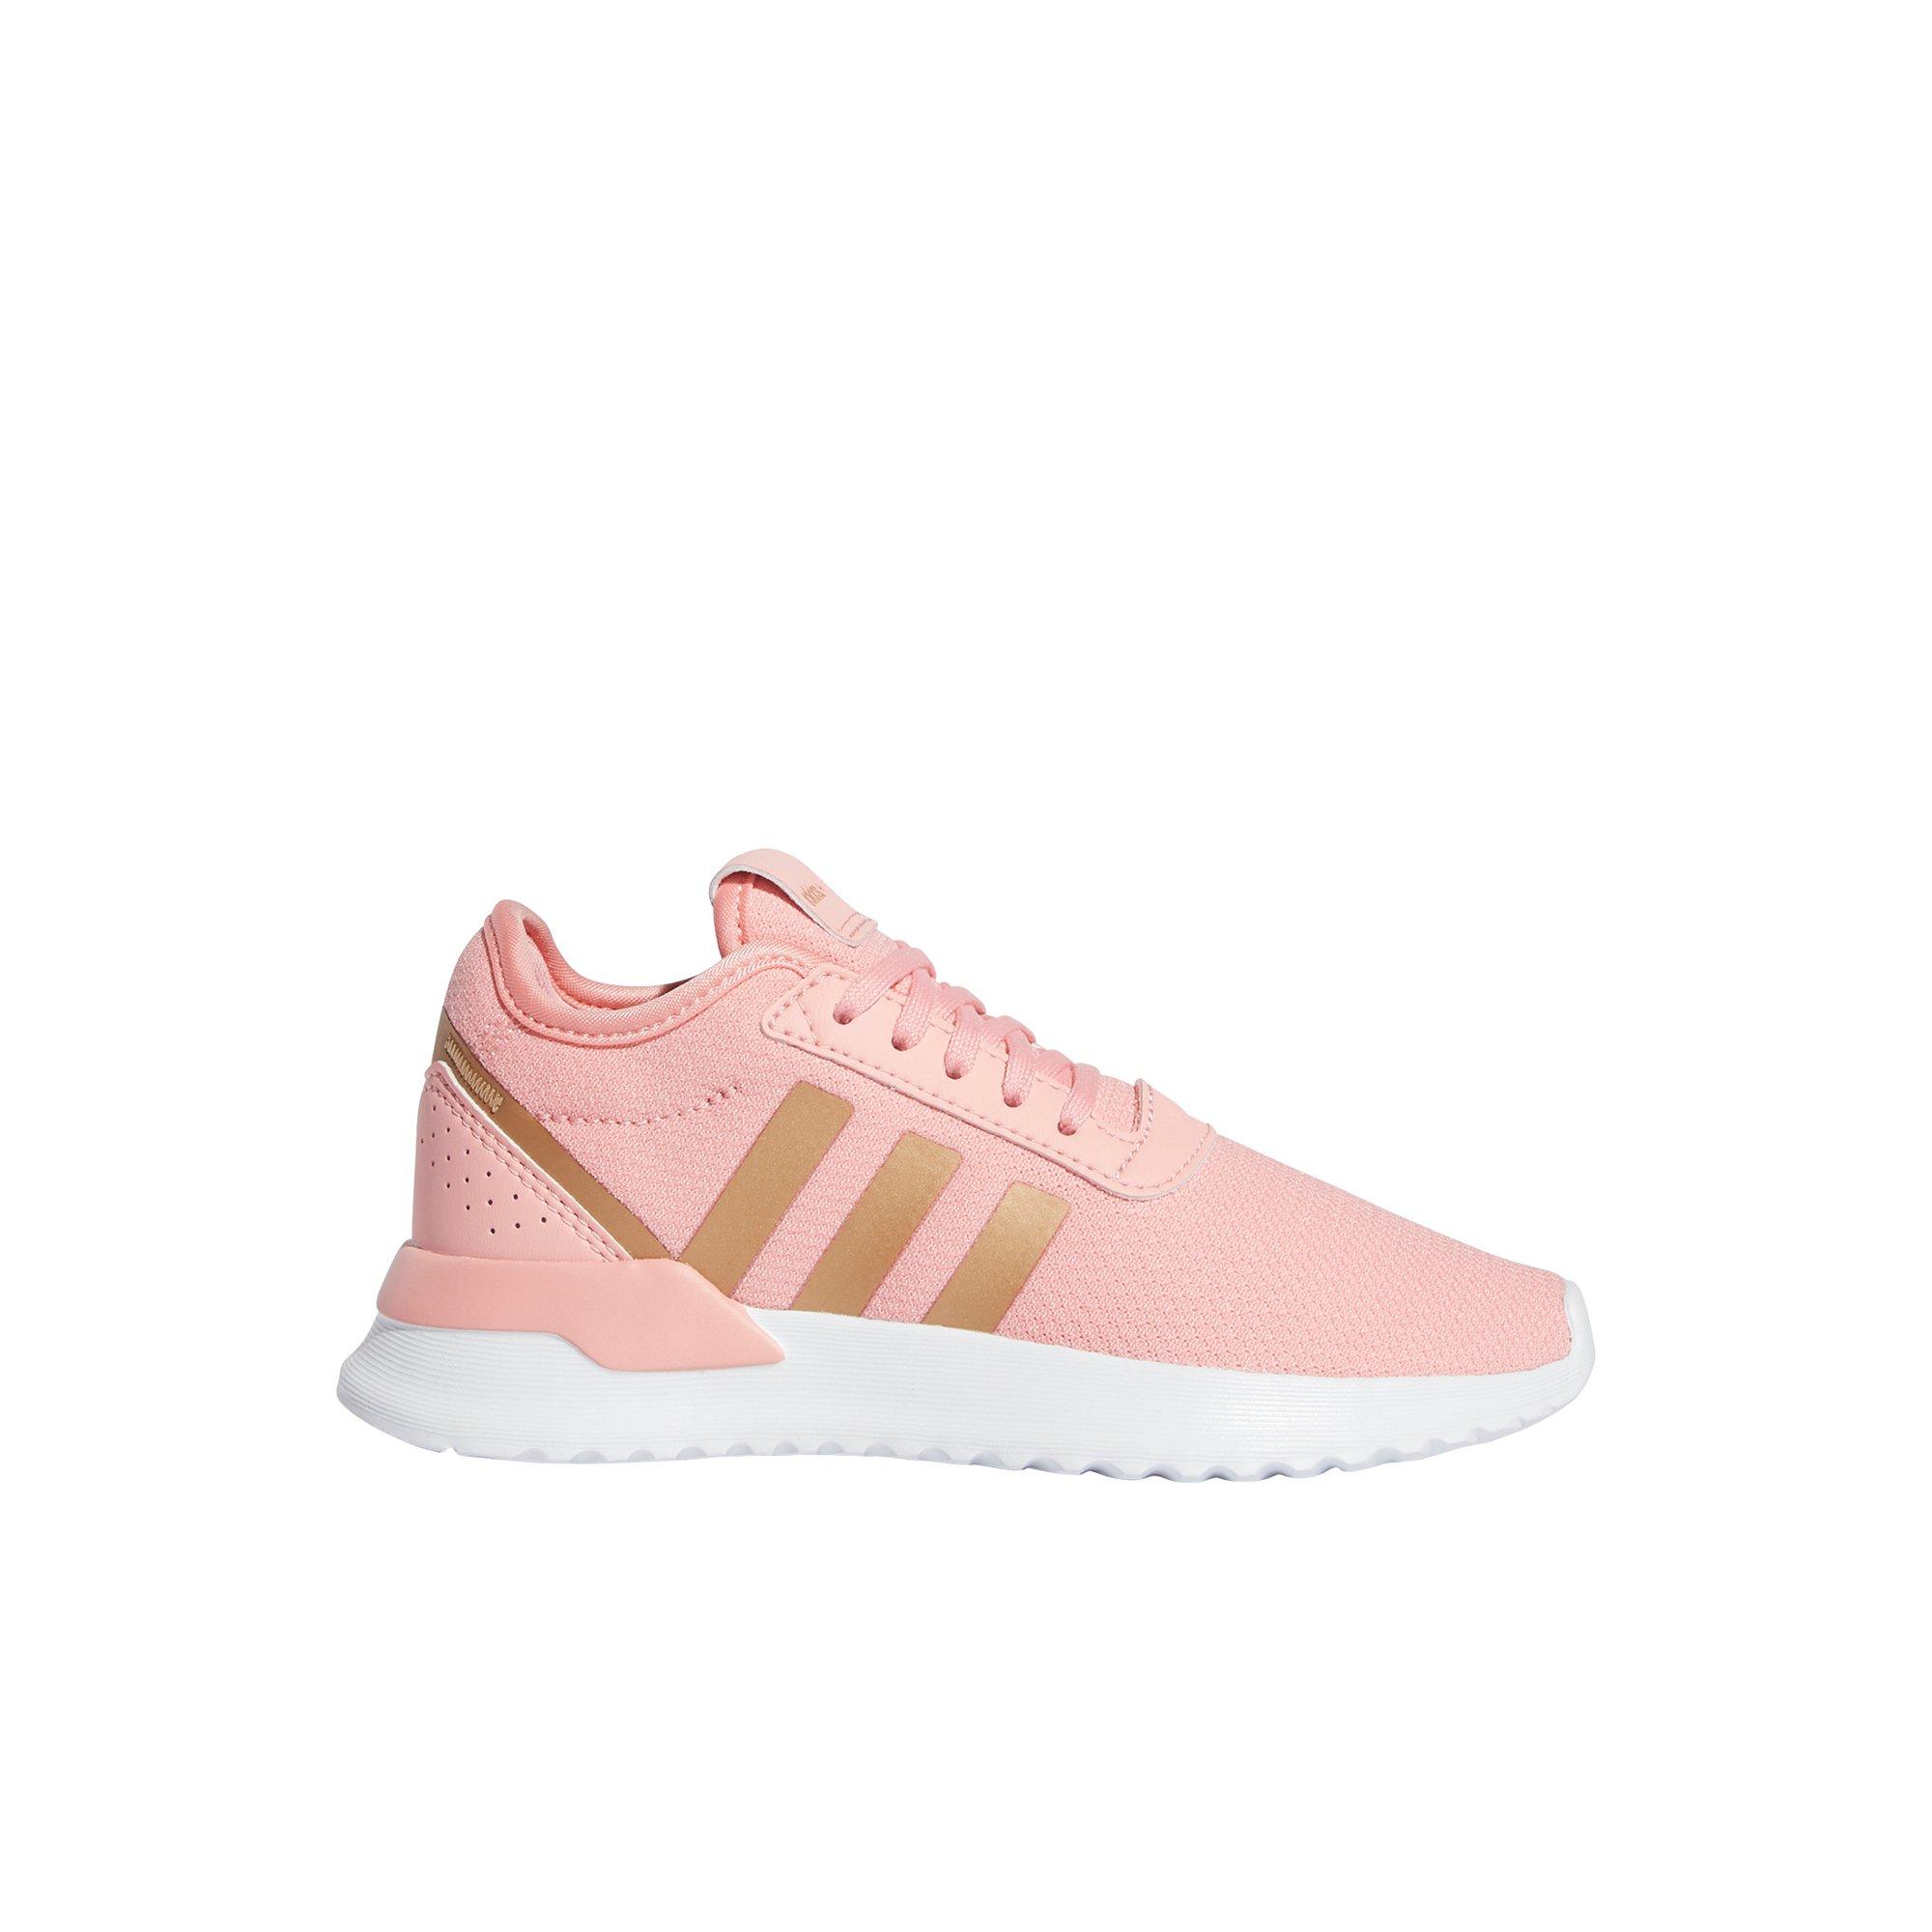 adidas rose gold shoes